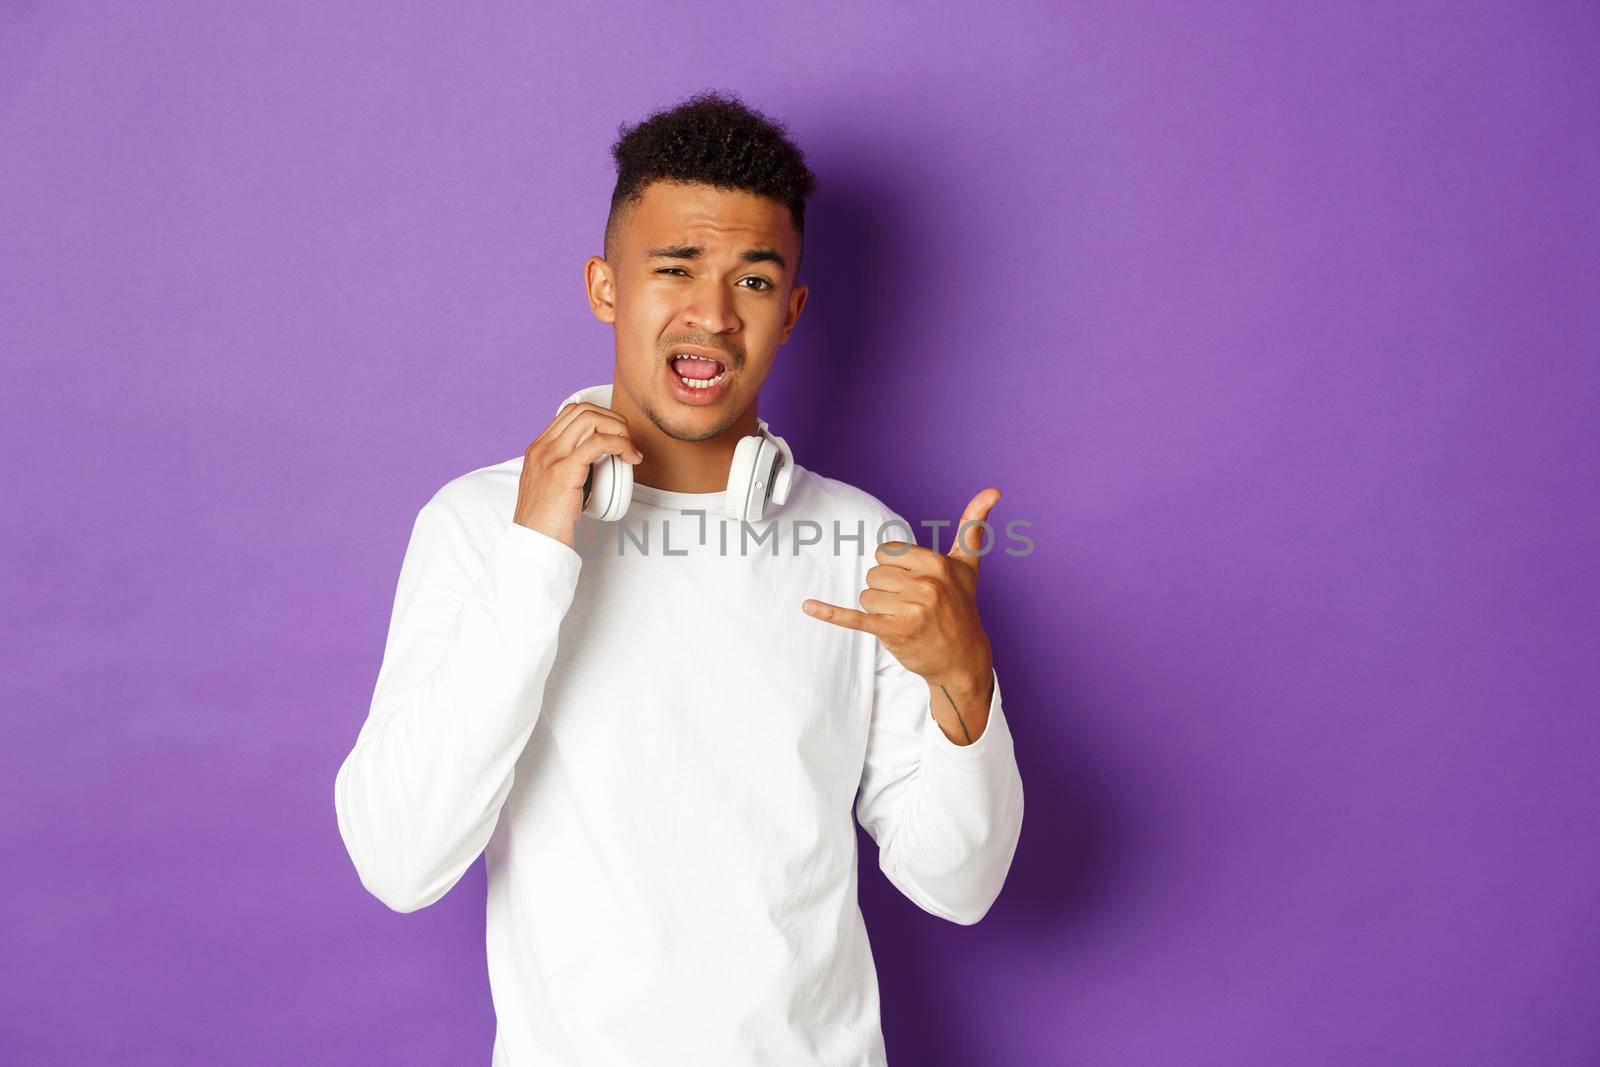 Image of sassy and cool african-american man, take-off headphones and showing hip hop gesture, standing over purple background.